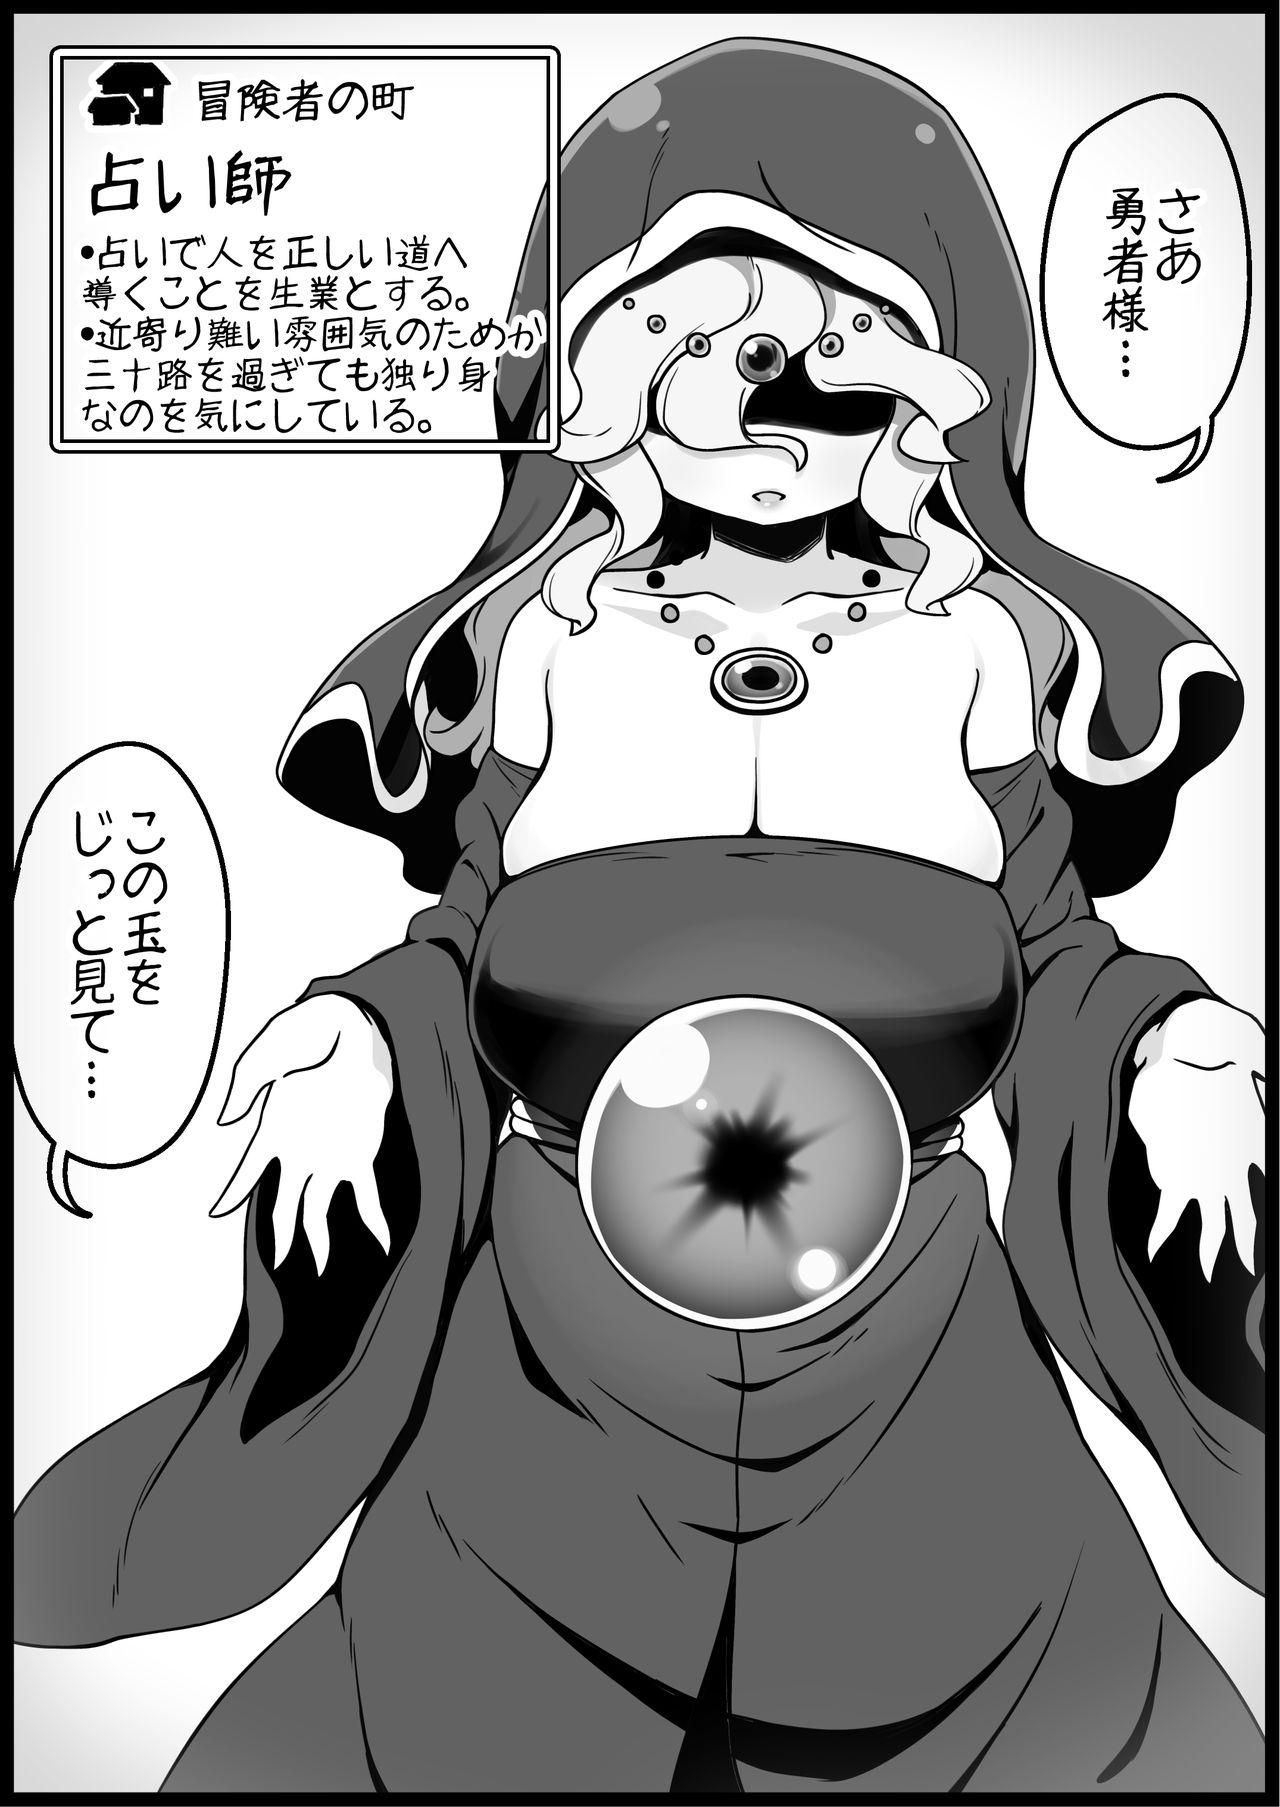 Cowgirl [Succubus Egg] Fantasy World 2 Too Forgiving to Heroes-Continued NPC (mob) Opponent-Centered Short H Manga Collection- - Original Jerking Off - Page 6